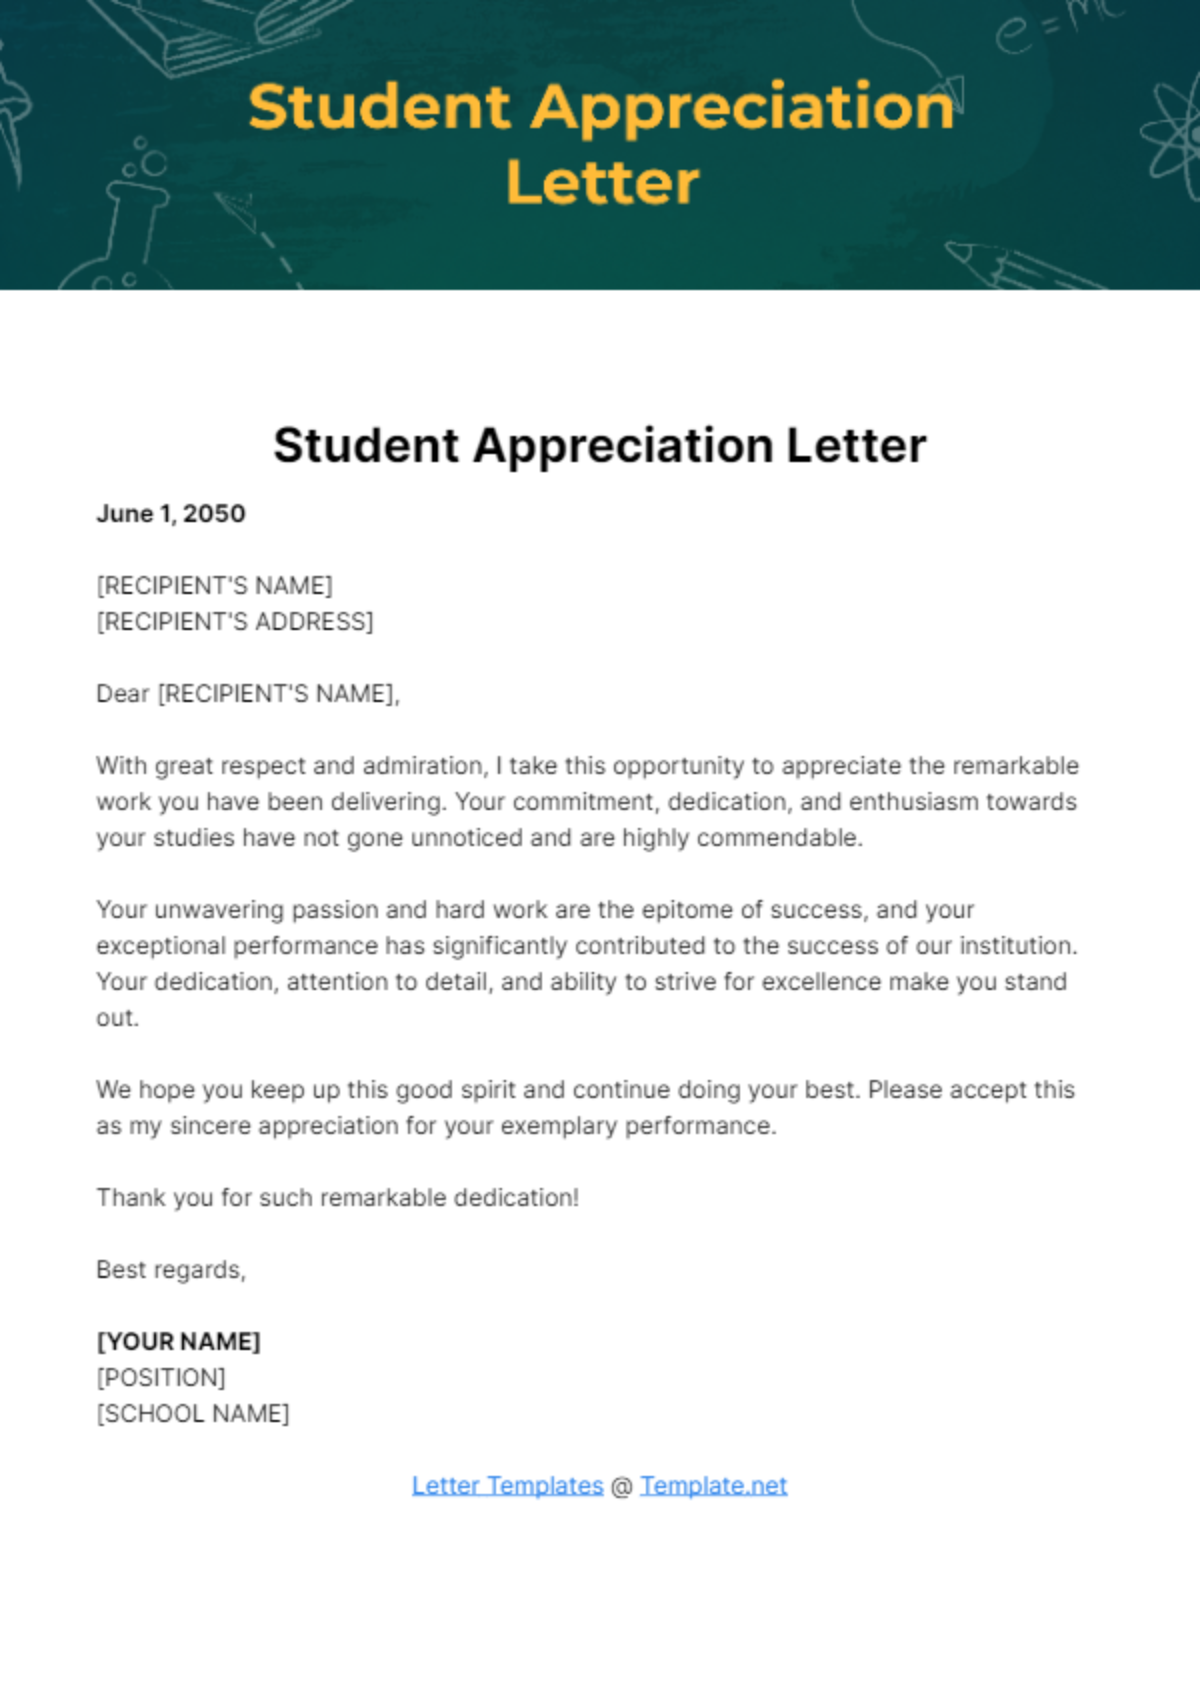 Free Student Appreciation Letter Template